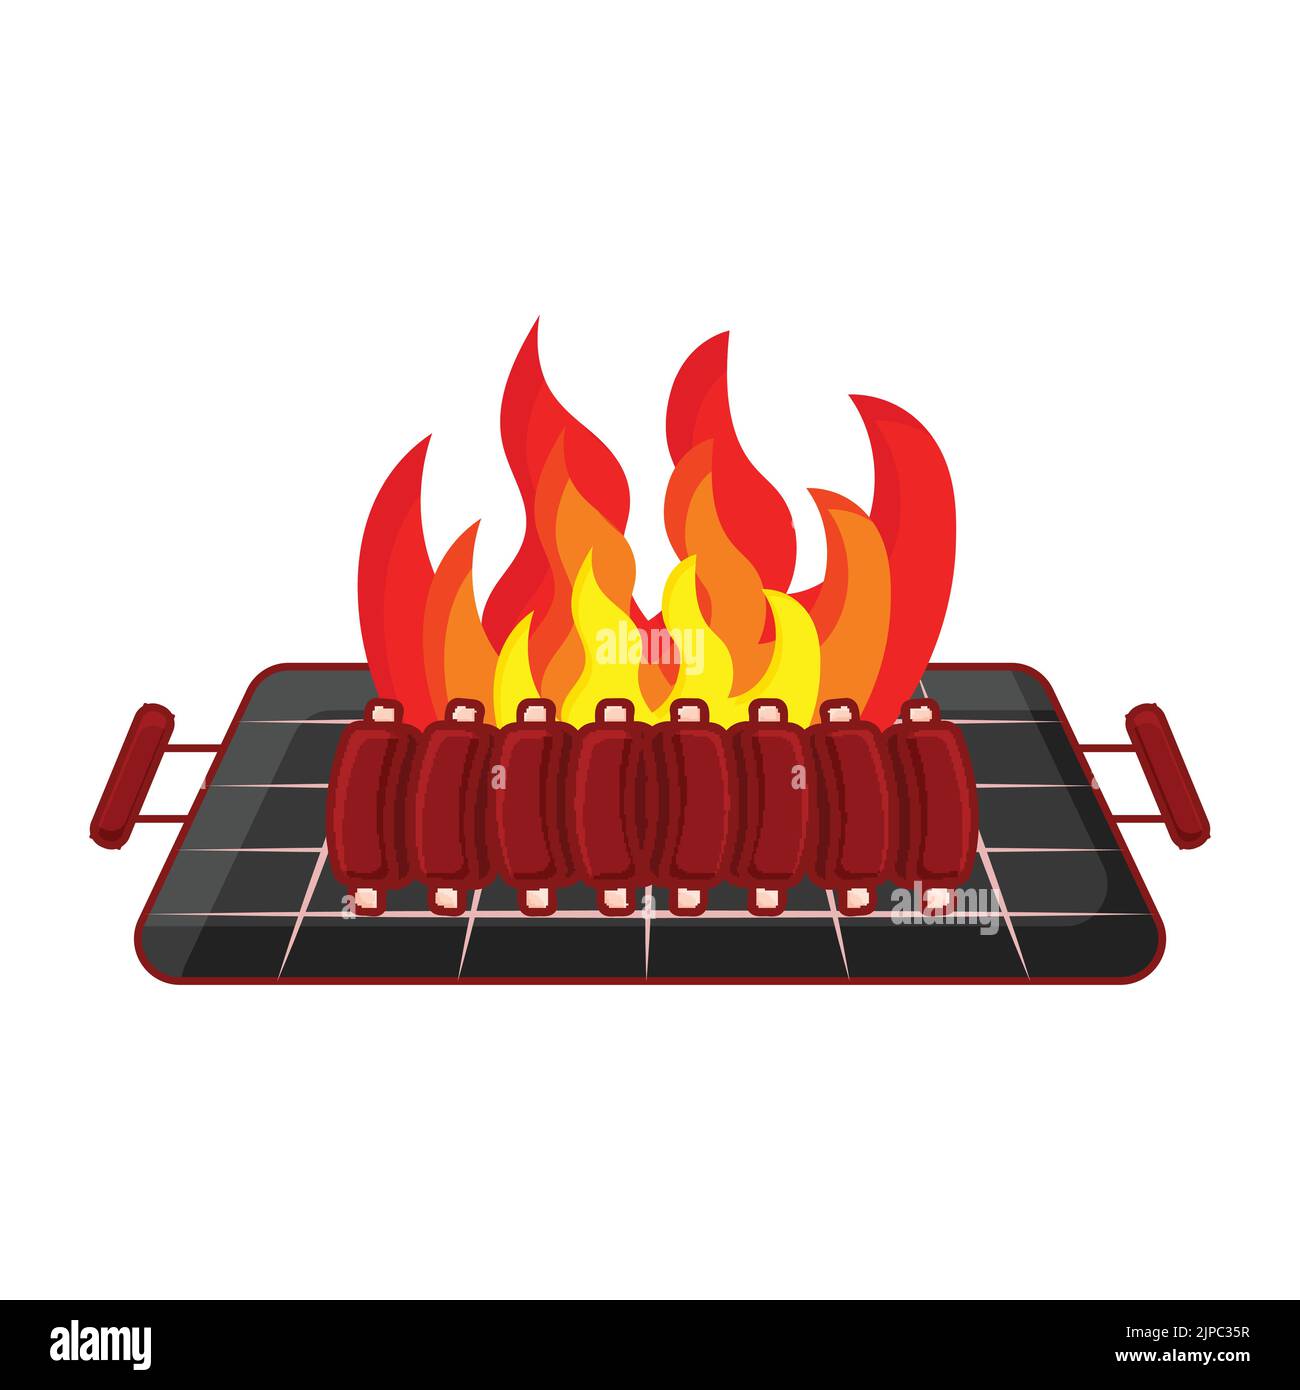 Rib Roast On Flaming Barbecue Grill On White Background. Stock Vector